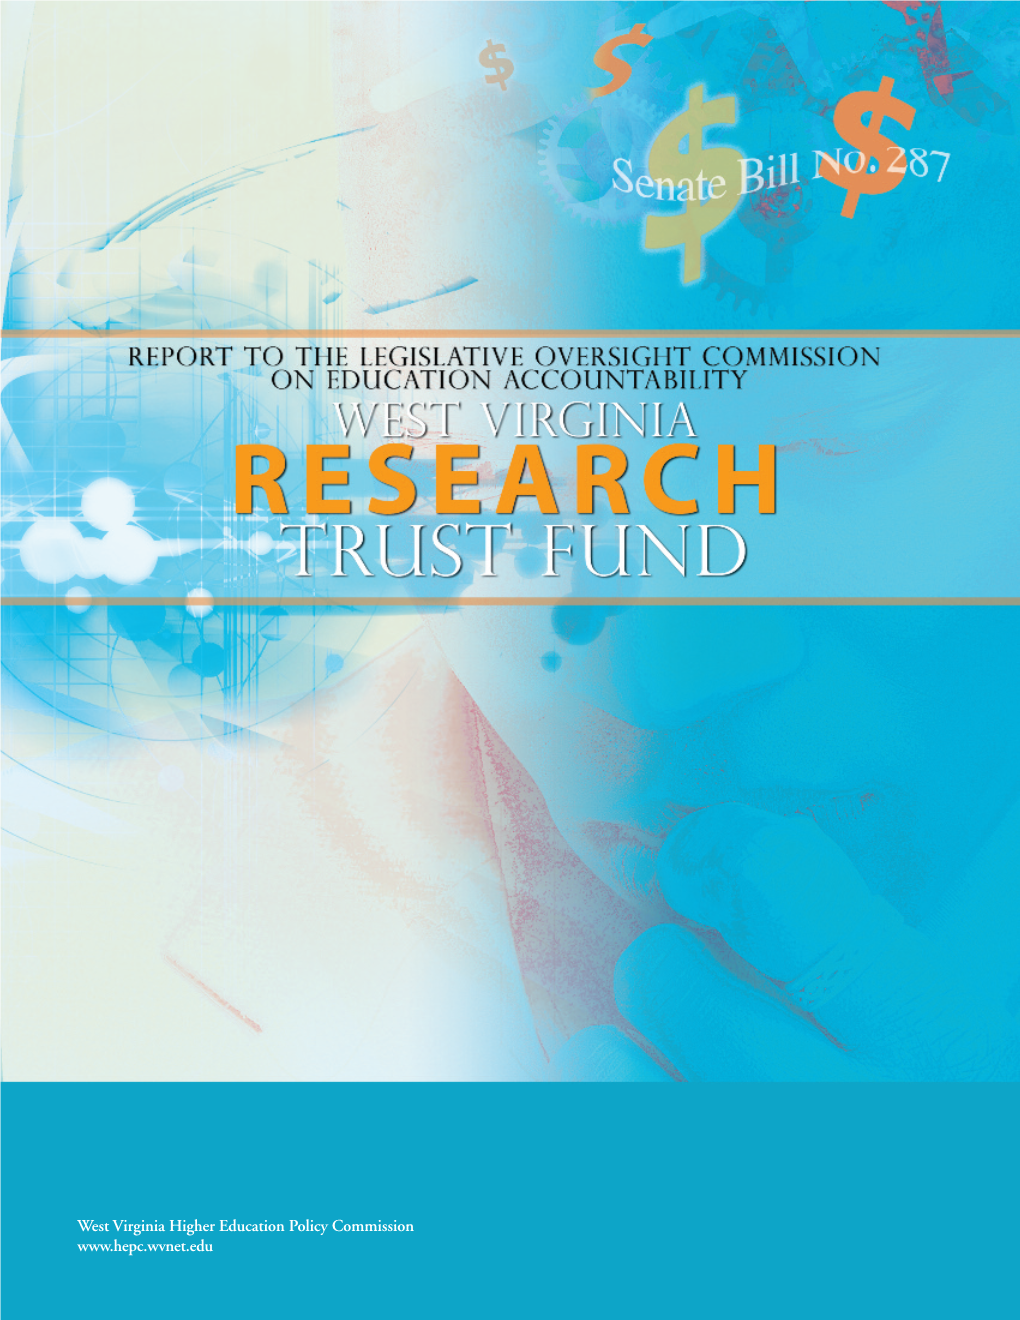 Marshall University Research Endowment Plan Annual Report 2011-2012